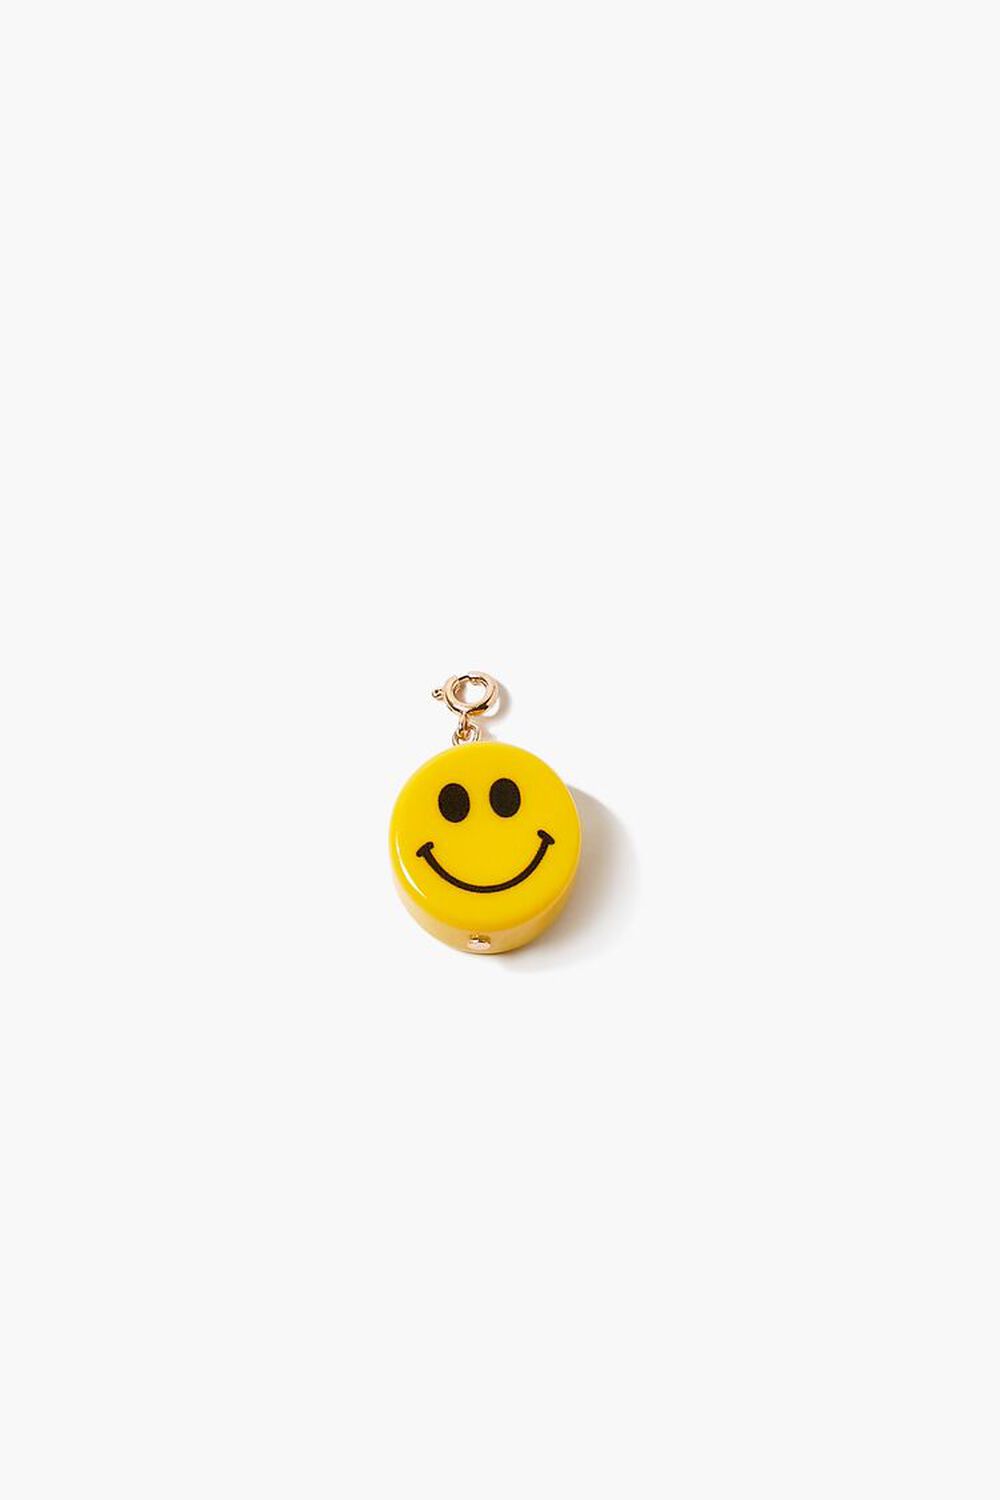 YELLOW Smiling Face Charm, image 1